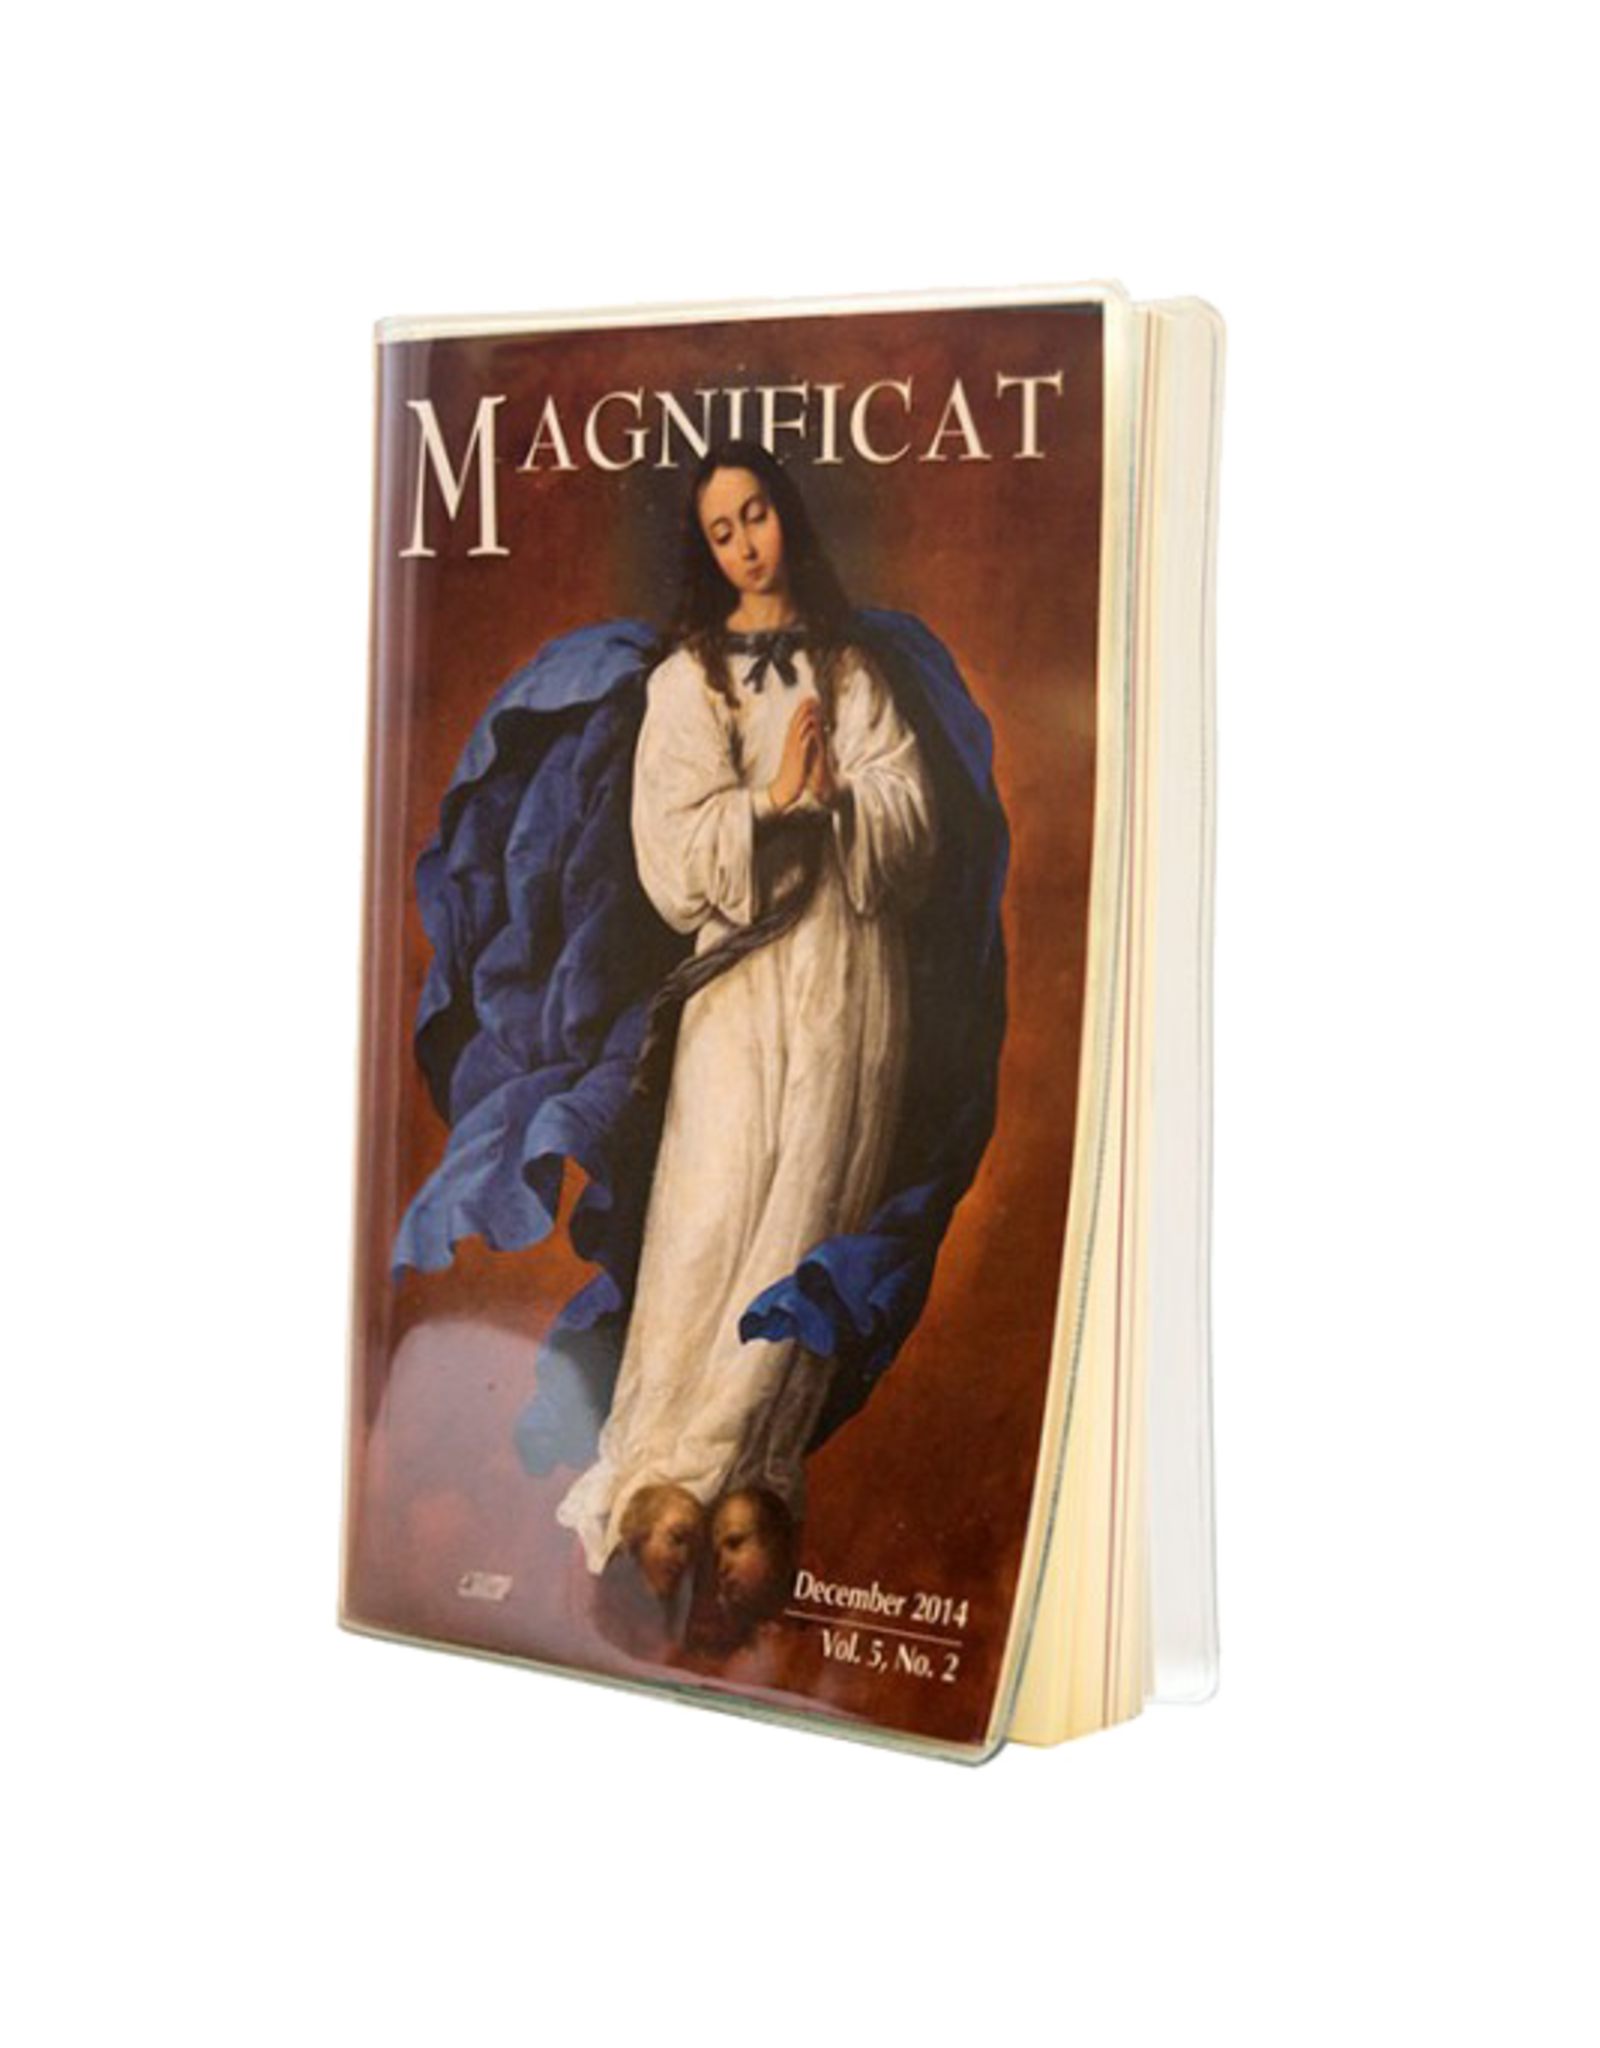 Clear Vinyl Cover for Magnificat